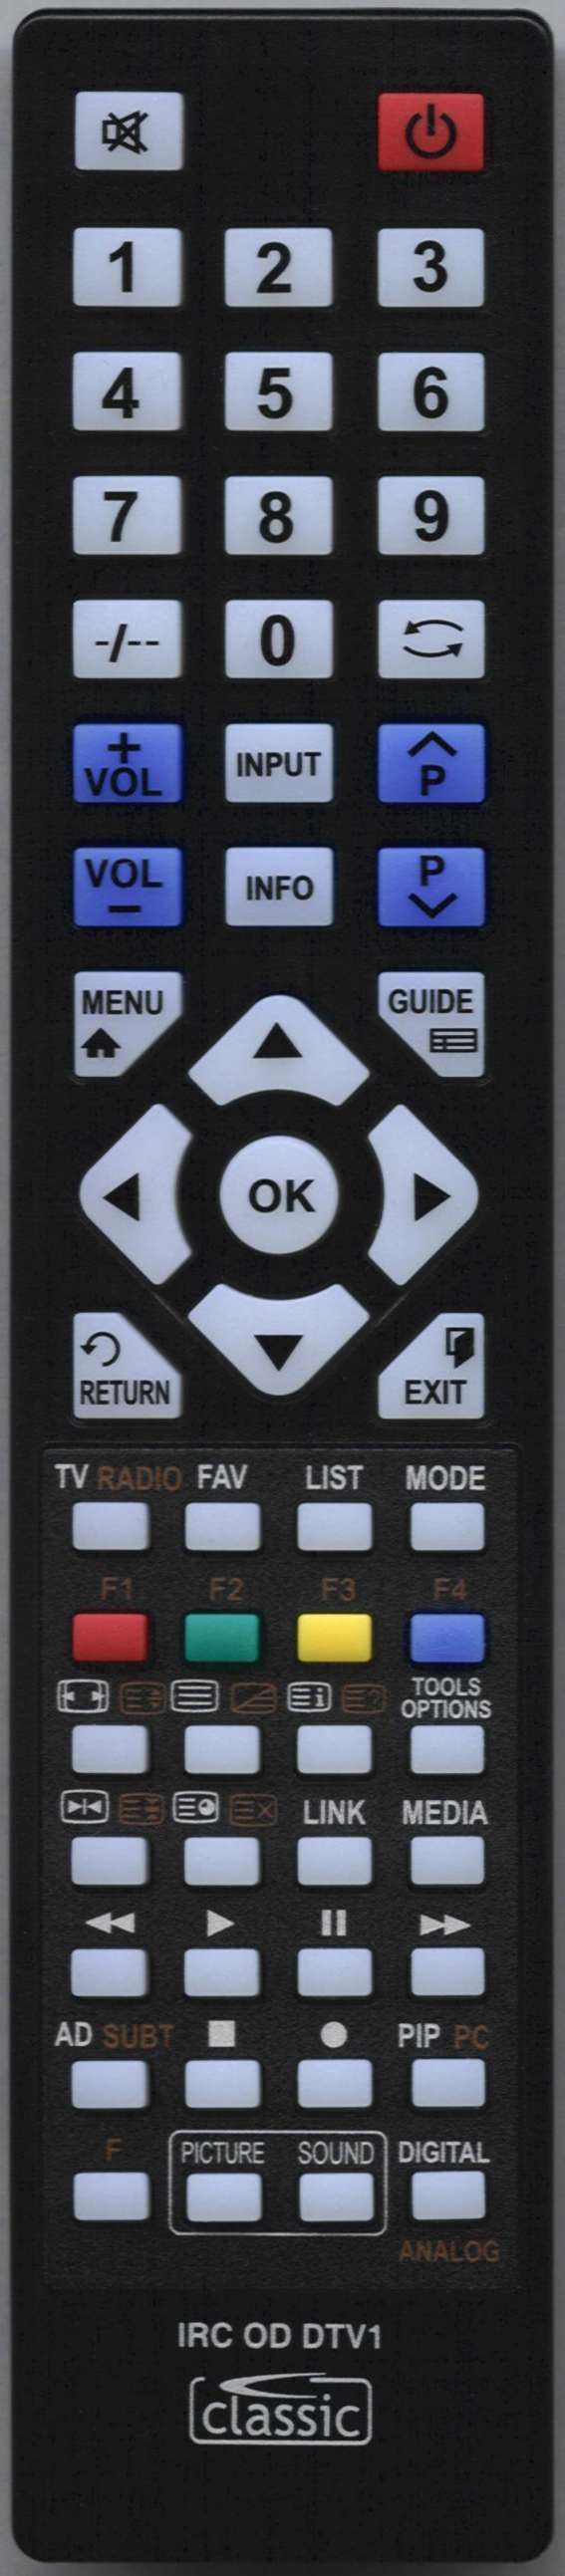 Daewoo DTY 28A8S Remote Control